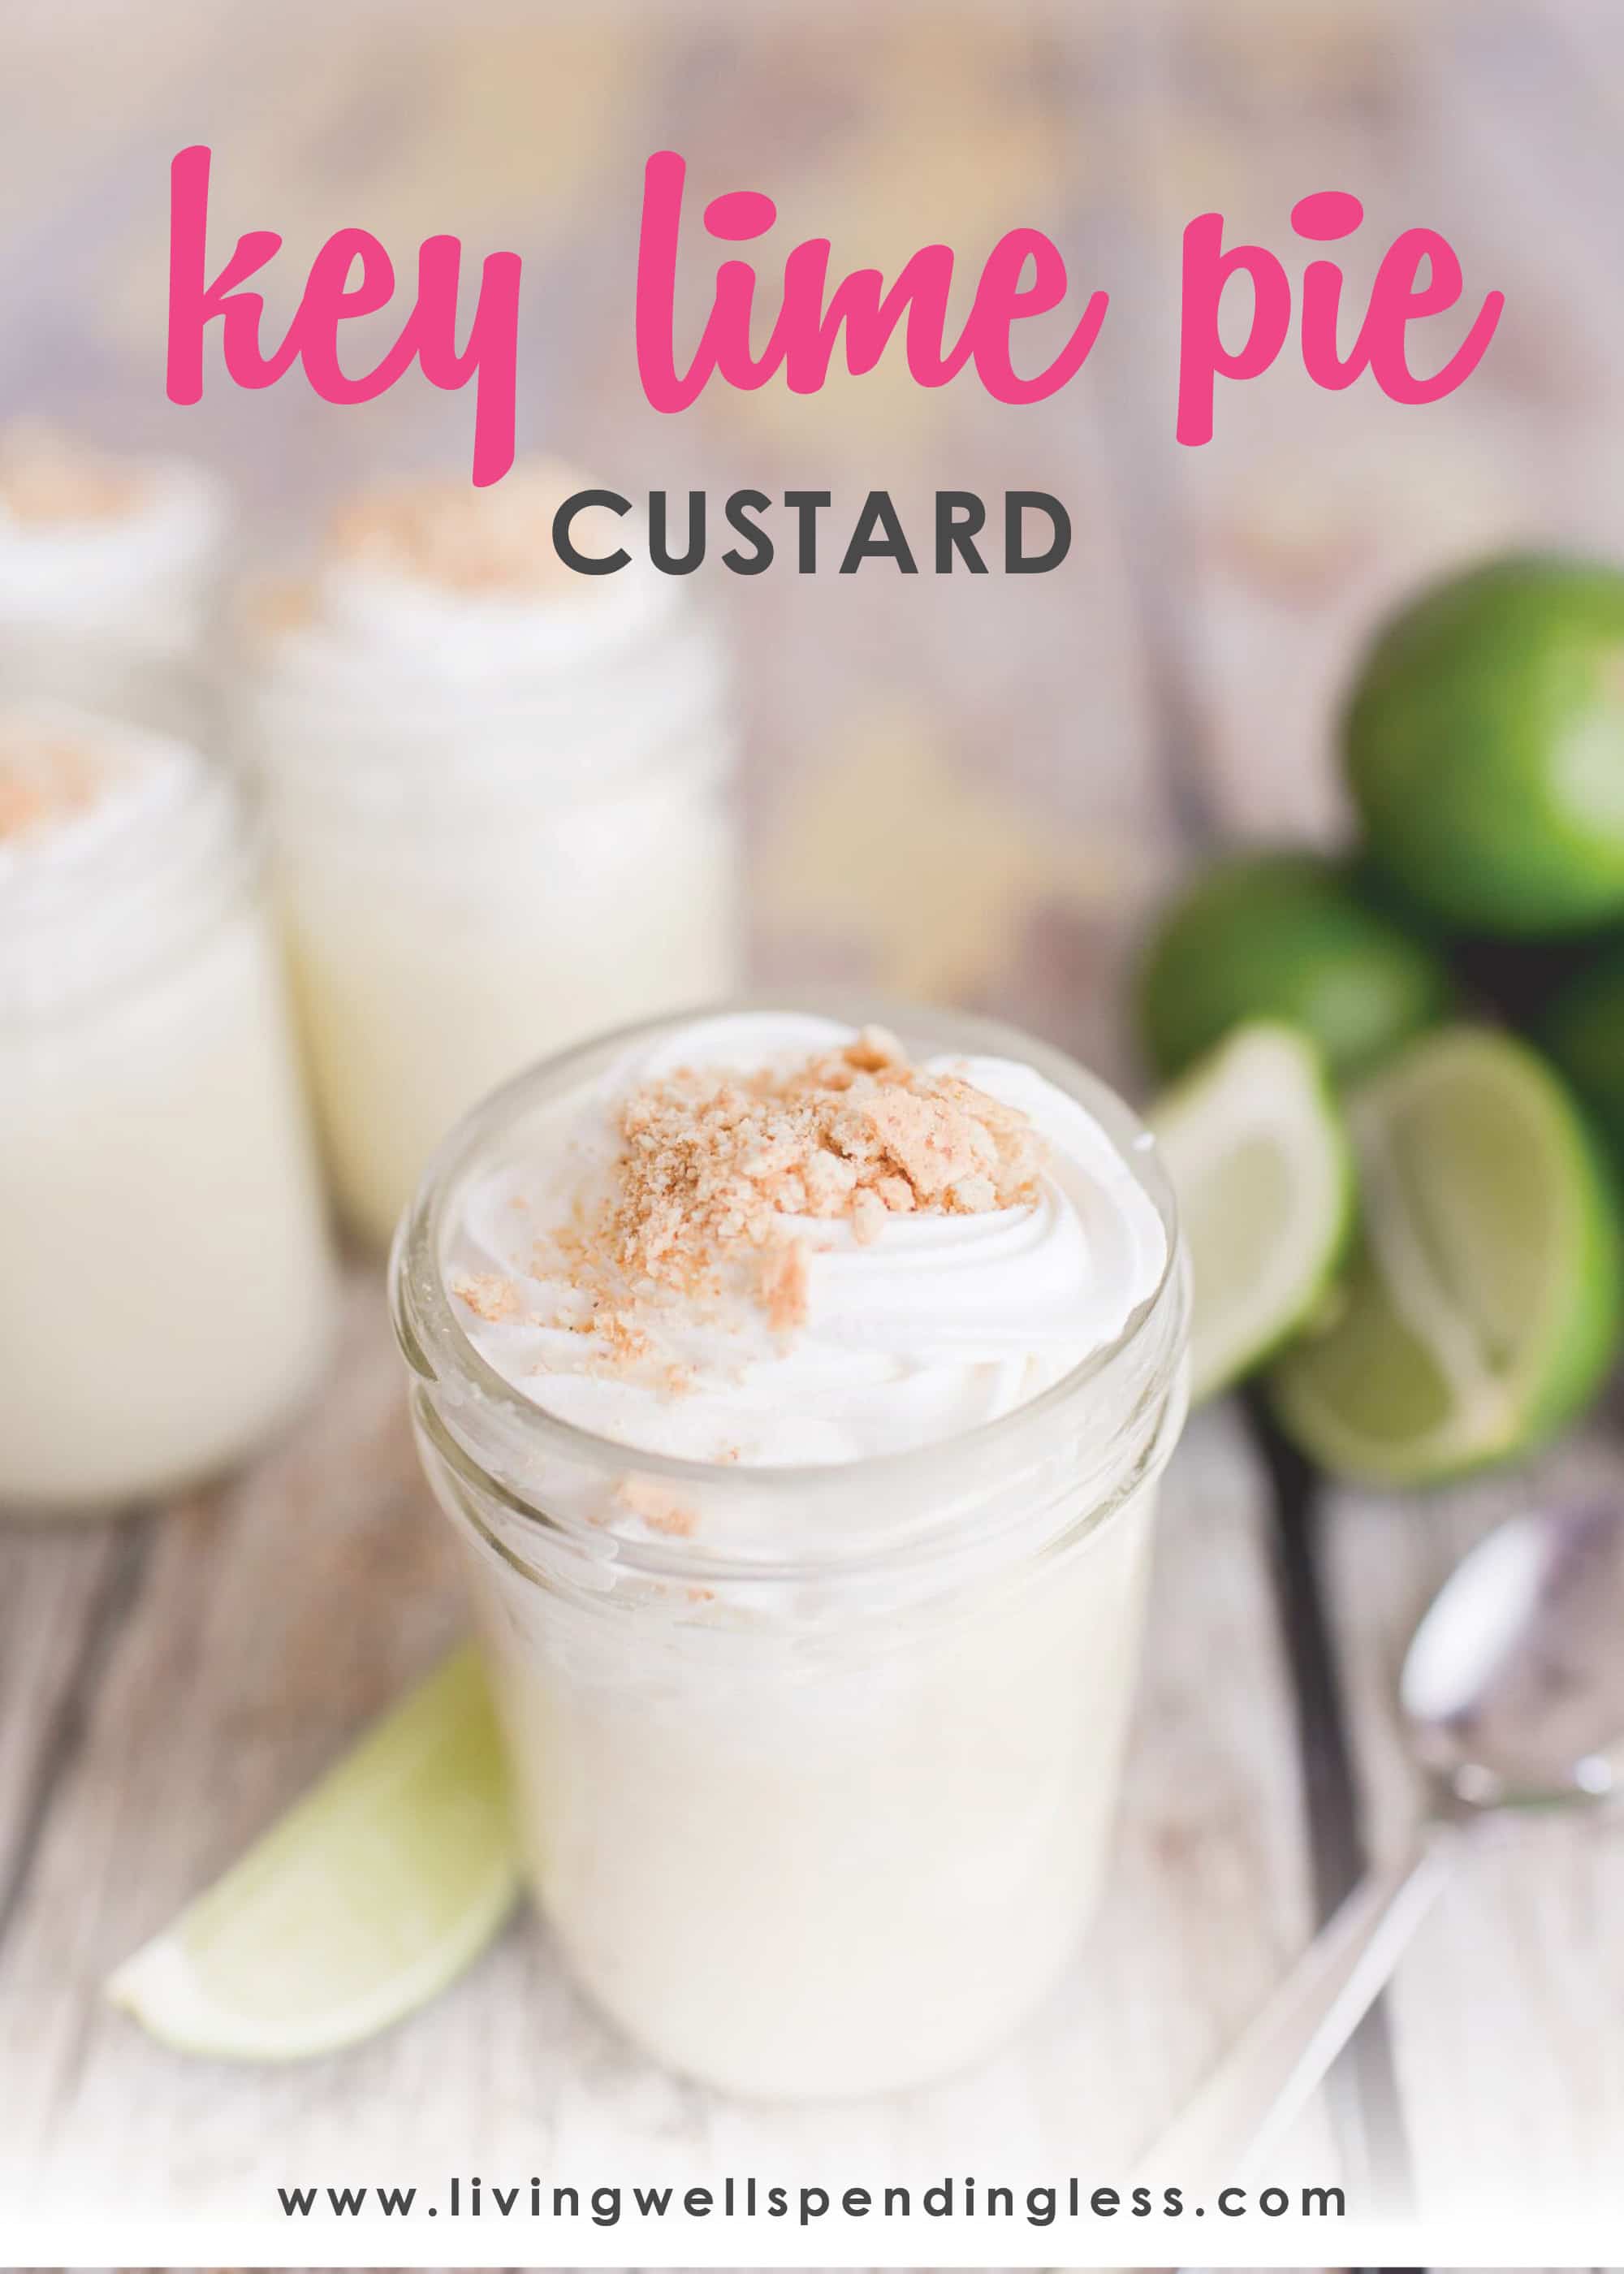 Need a go-to dessert recipe to keep on hand for impromptu guests and last-minute cravings? This simple 5-ingredient Key Lime Pie Custard is sure to be a hit! It comes together fast with just a few staples (and one creative ingredient!). #livingwellspendingless #desserts #recipes #dessertrecipes #easydesserts